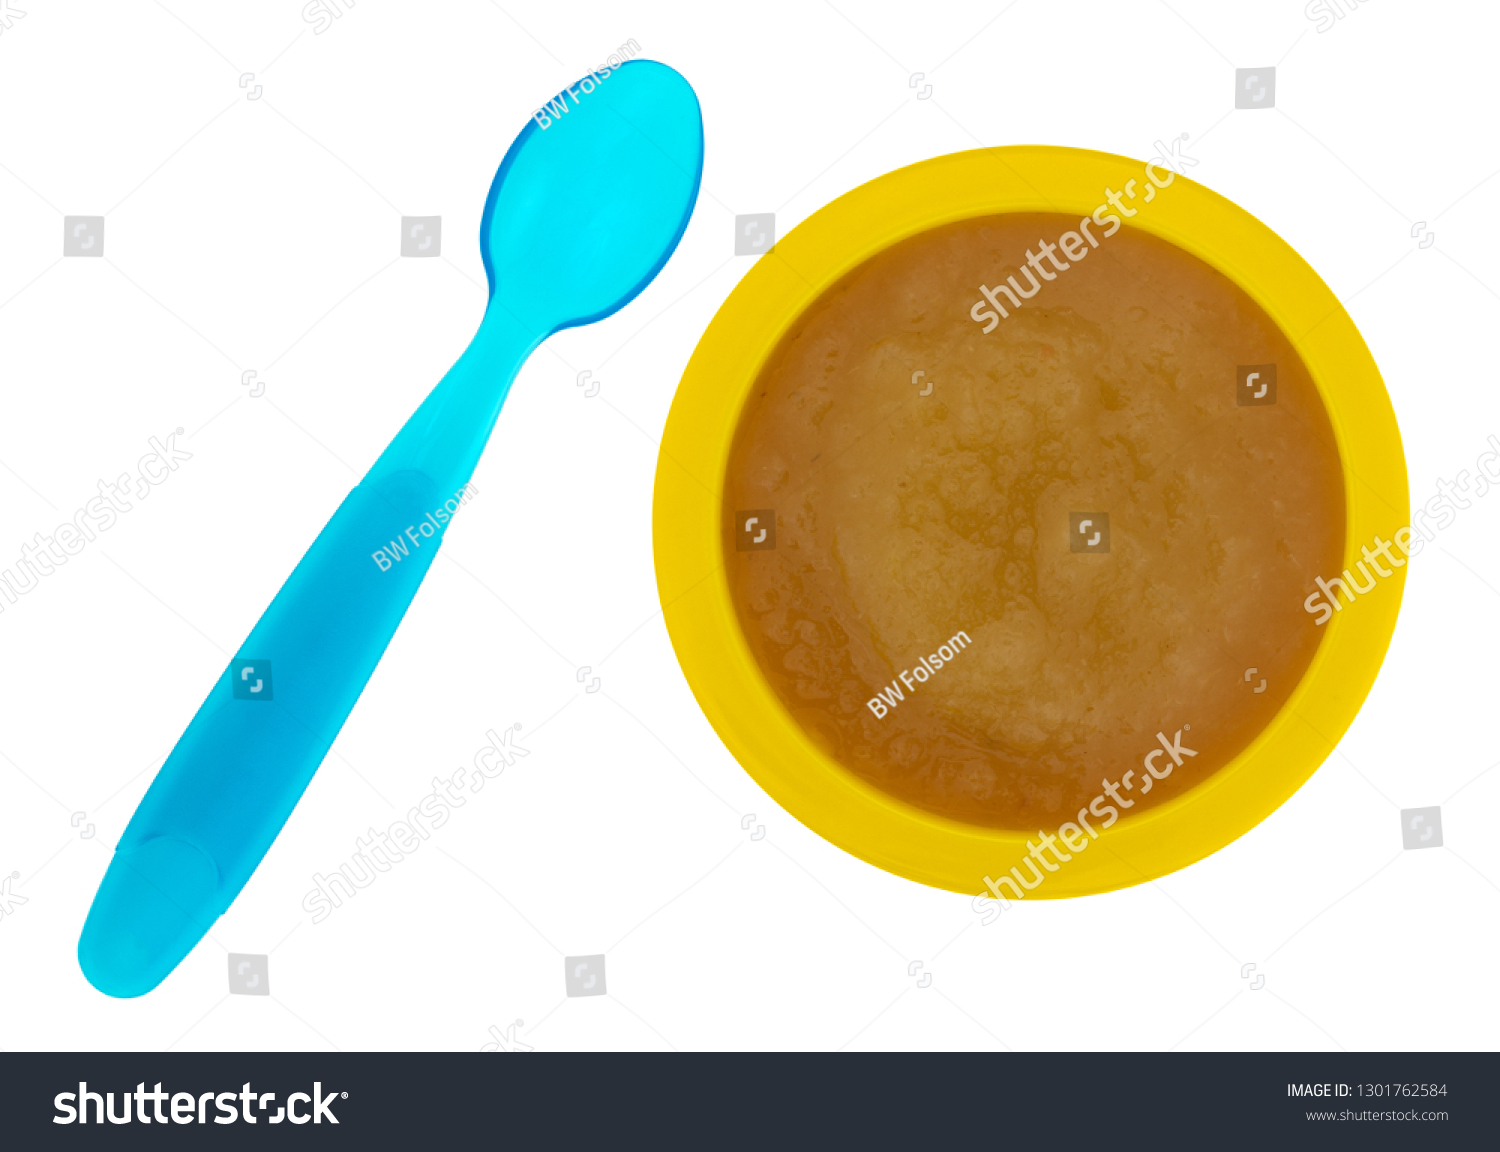 Download Top View Yellow Bowl Filled Applesauce Food And Drink Stock Image 1301762584 PSD Mockup Templates